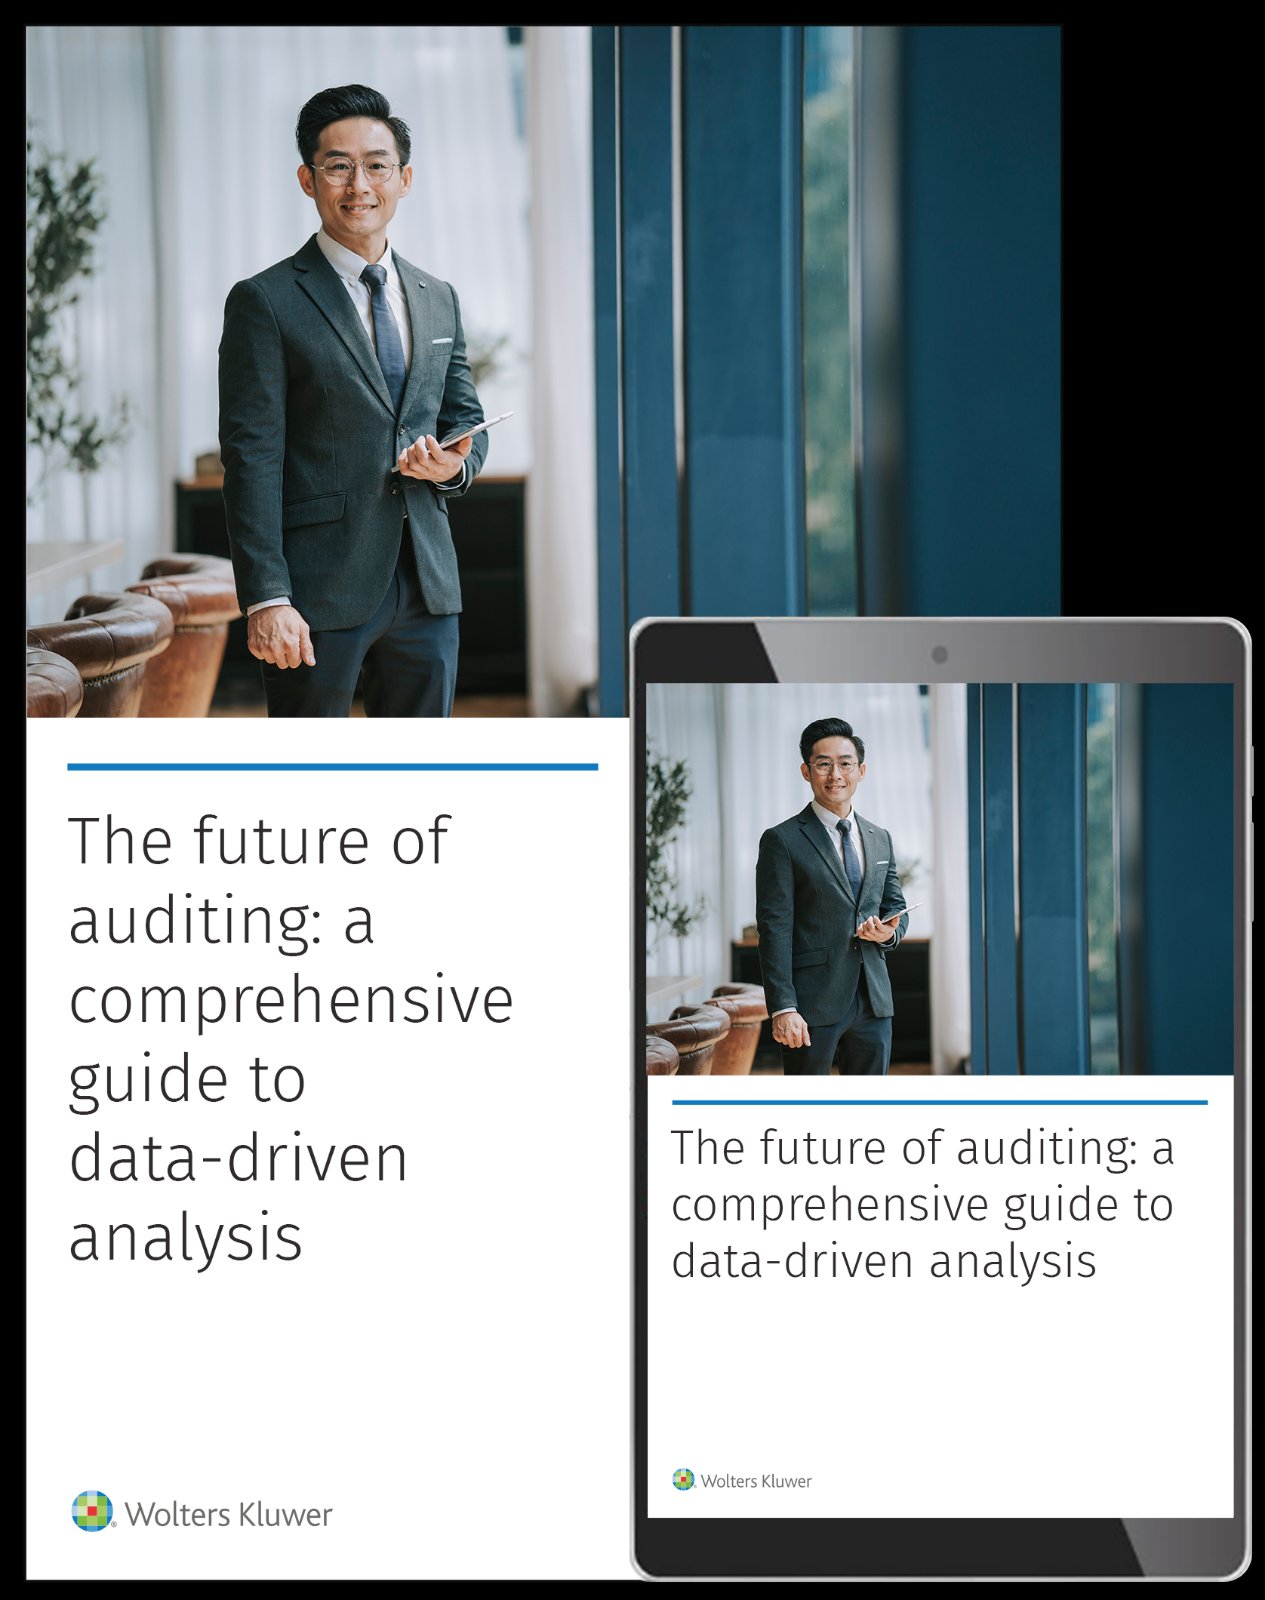 The future of auditing: a comprehensive guide to data-driven analysis